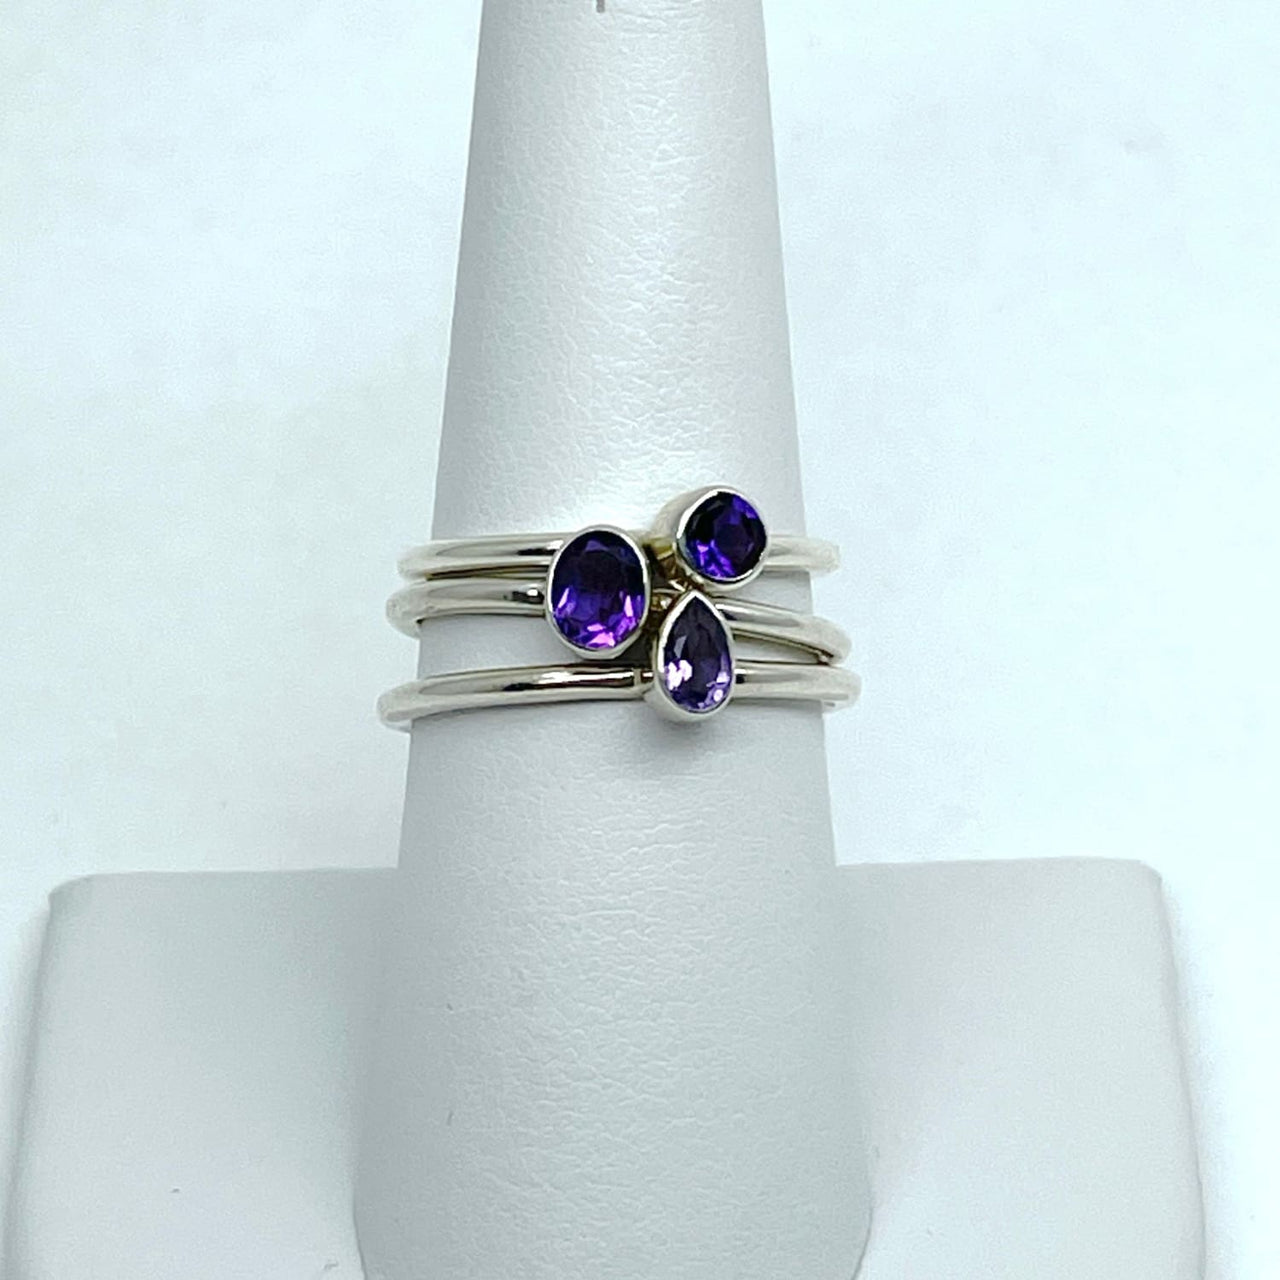 1 Amethyst Faceted Stackable Dainty Ring.925 Sterling Silver